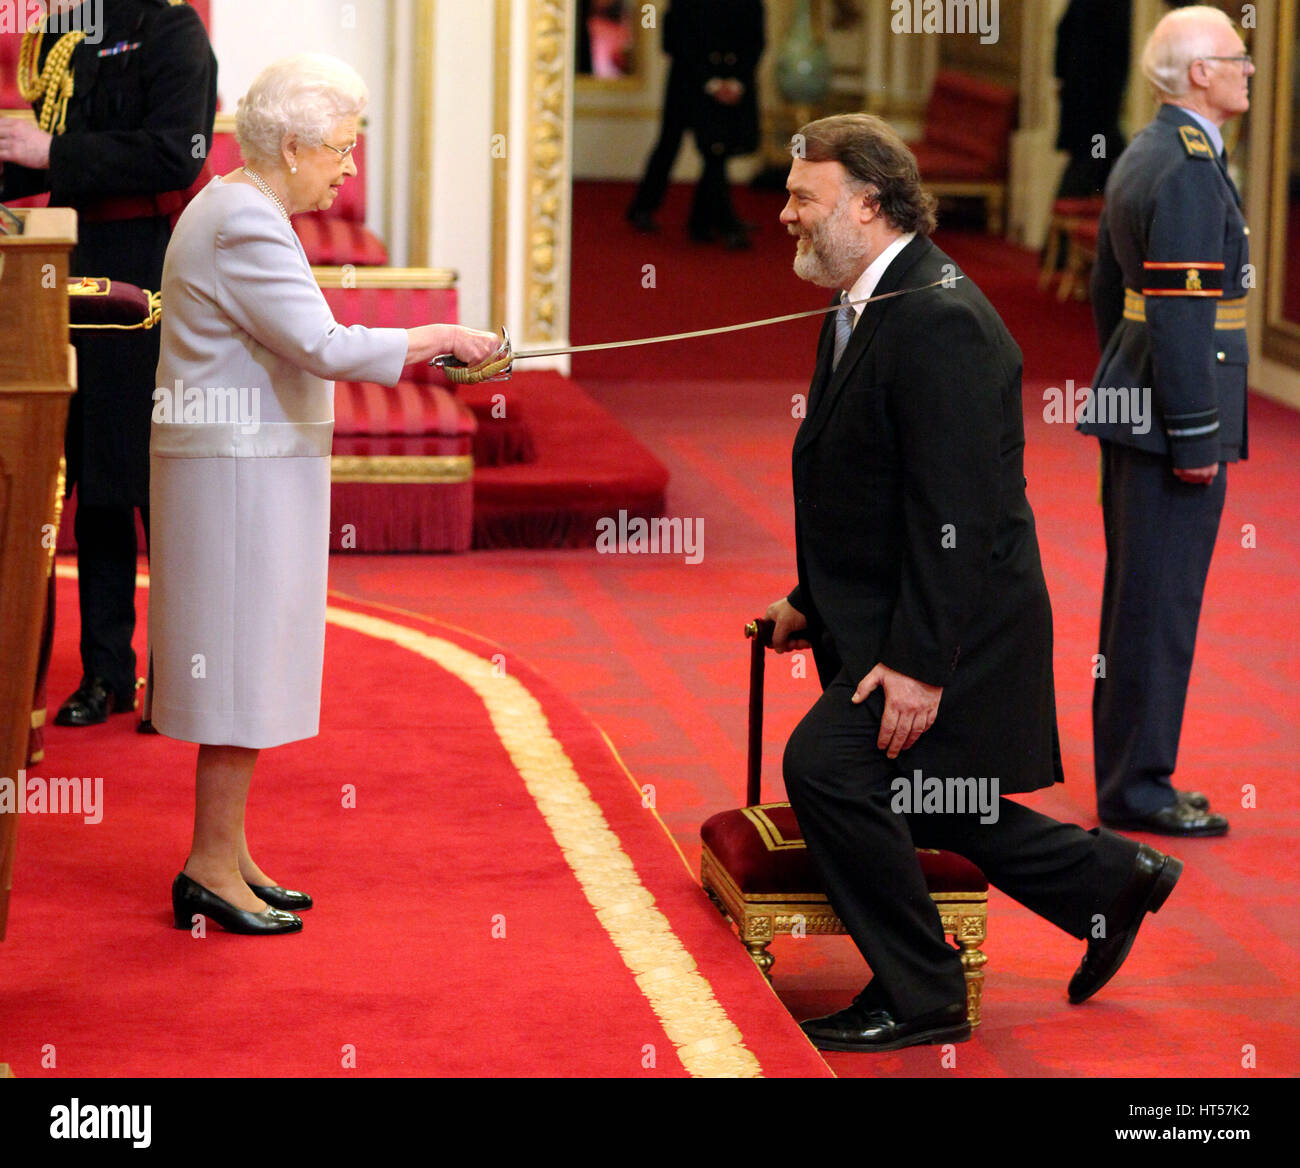 Sir Bryn Terfel Jones from London is made a Knight Bachelor of the British Empire by Queen Elizabeth II at Buckingham Palace. Stock Photo